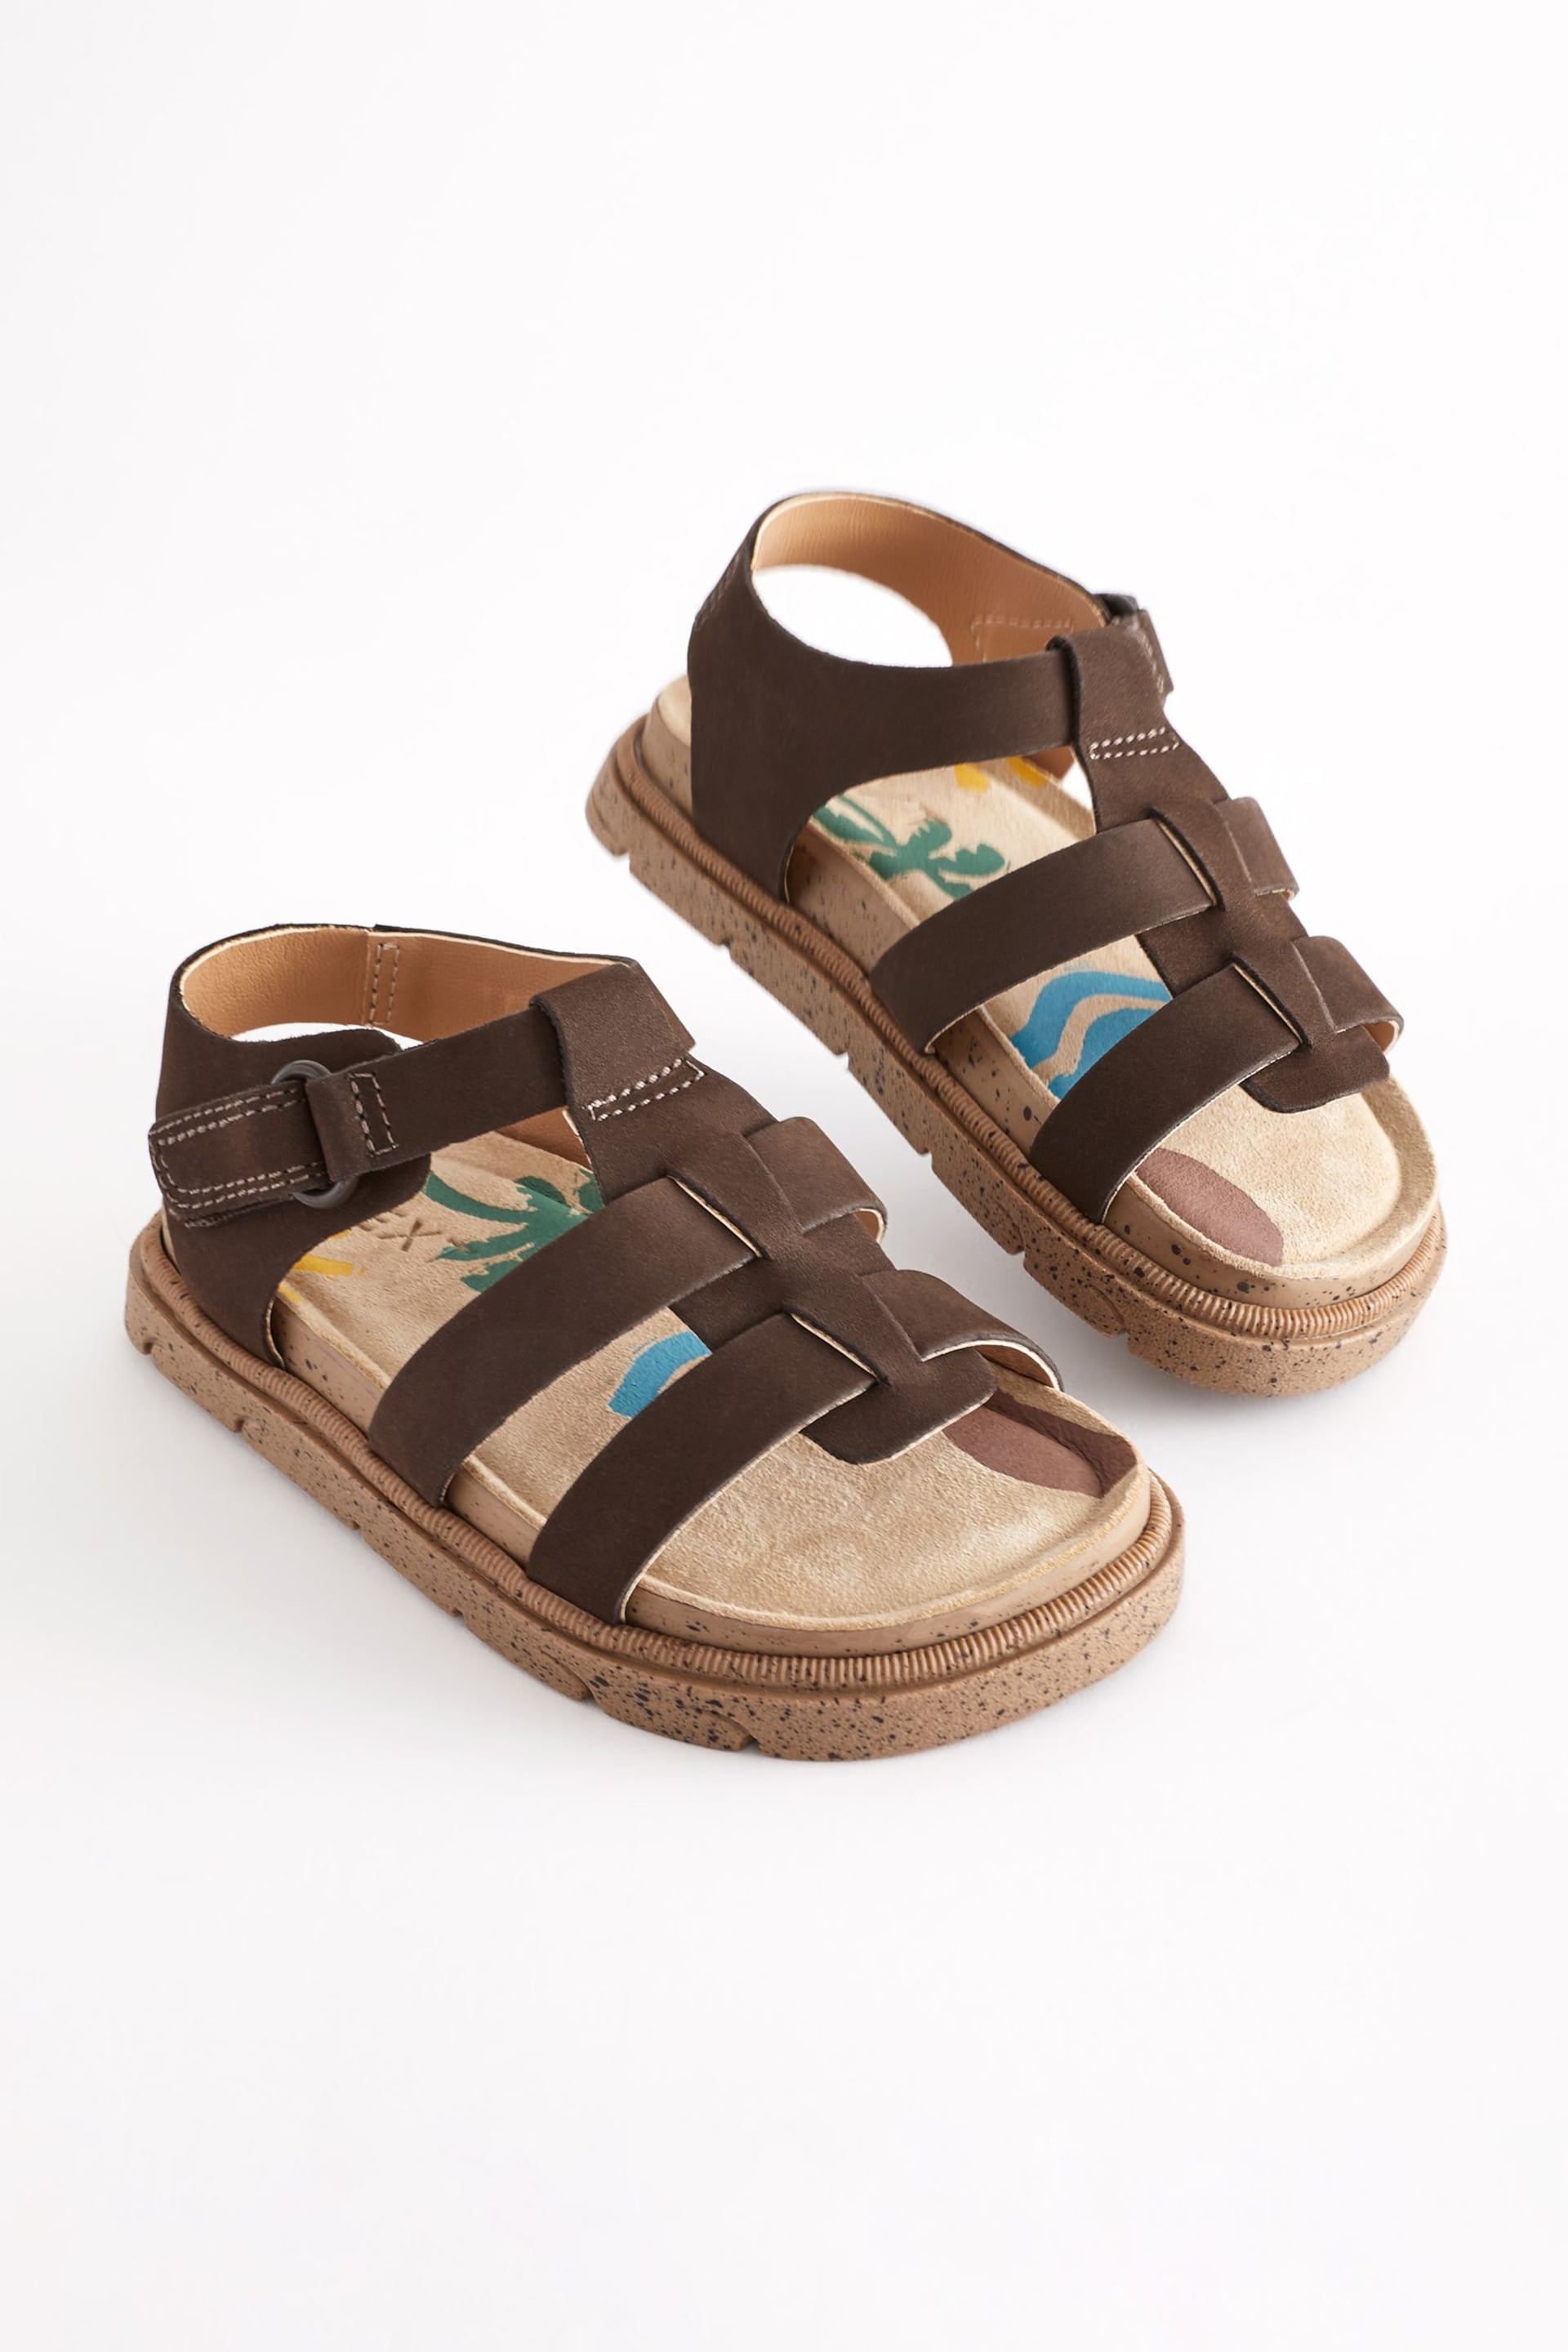 Brown Leather Fisherman Sandals - Image 1 of 7